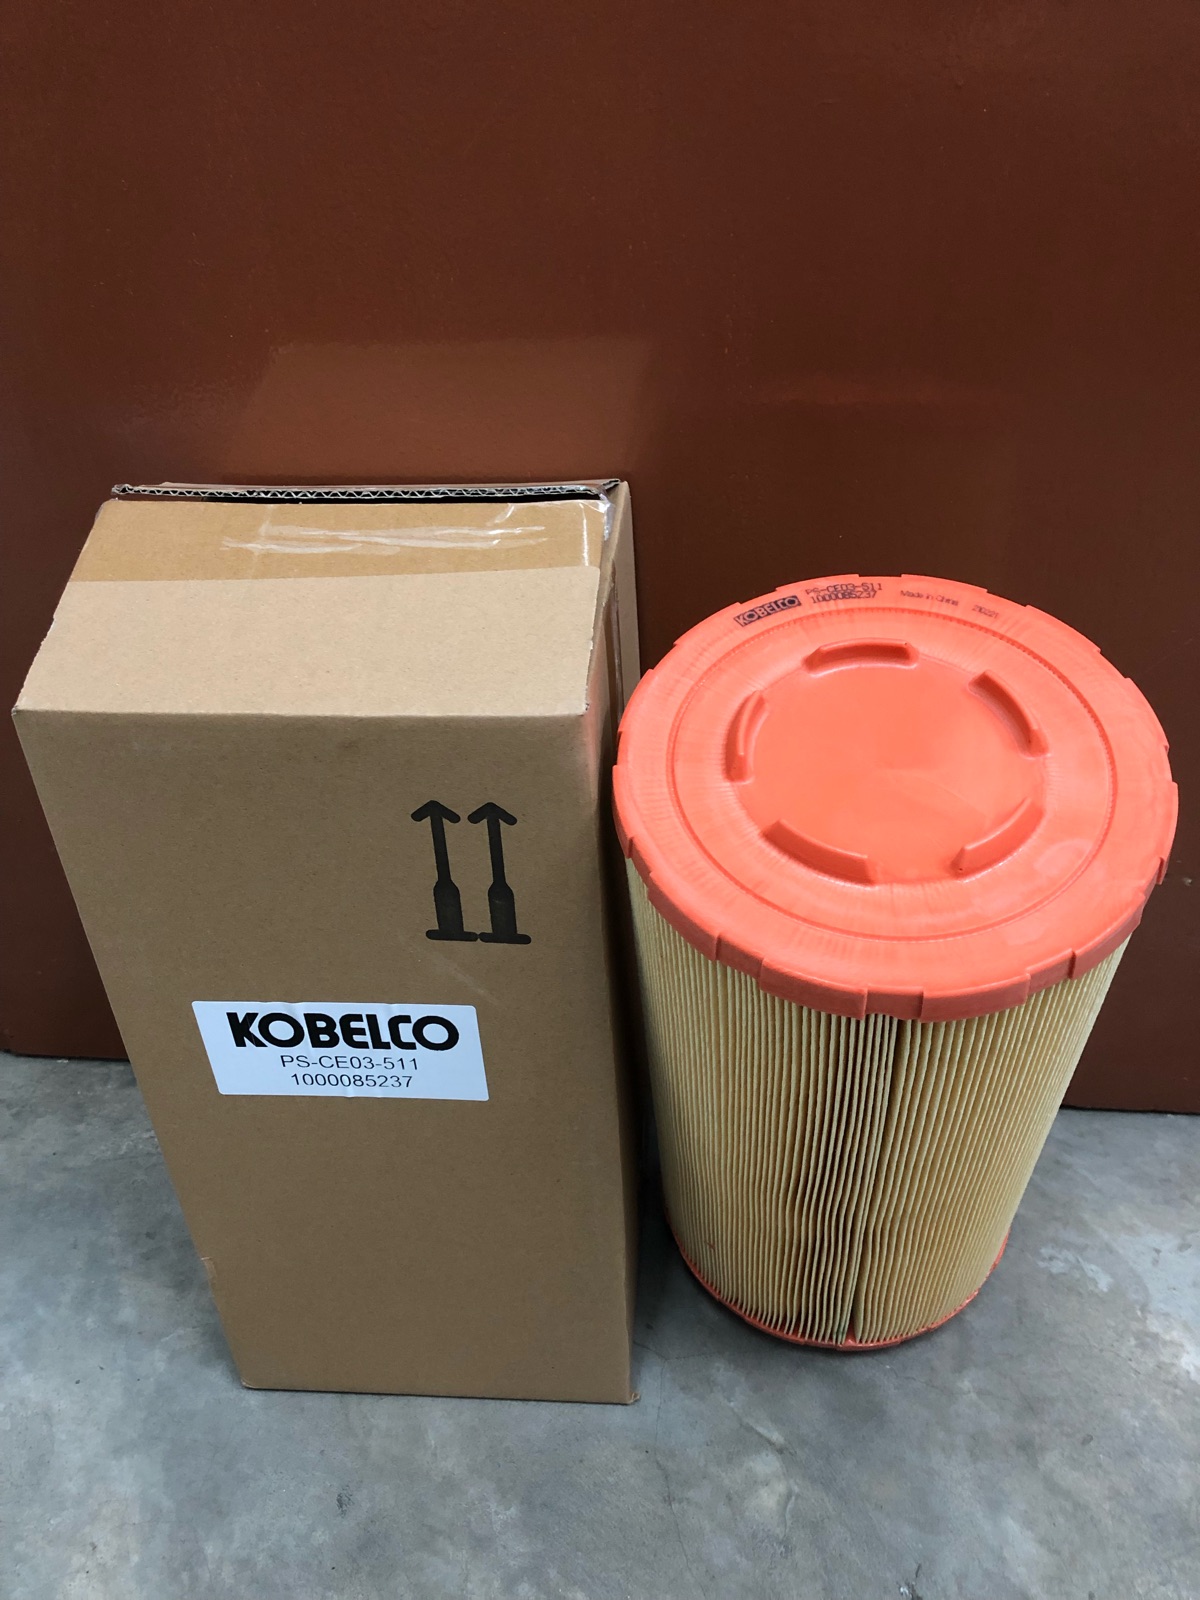 Kobelco Suction Filter PS-CE03-511